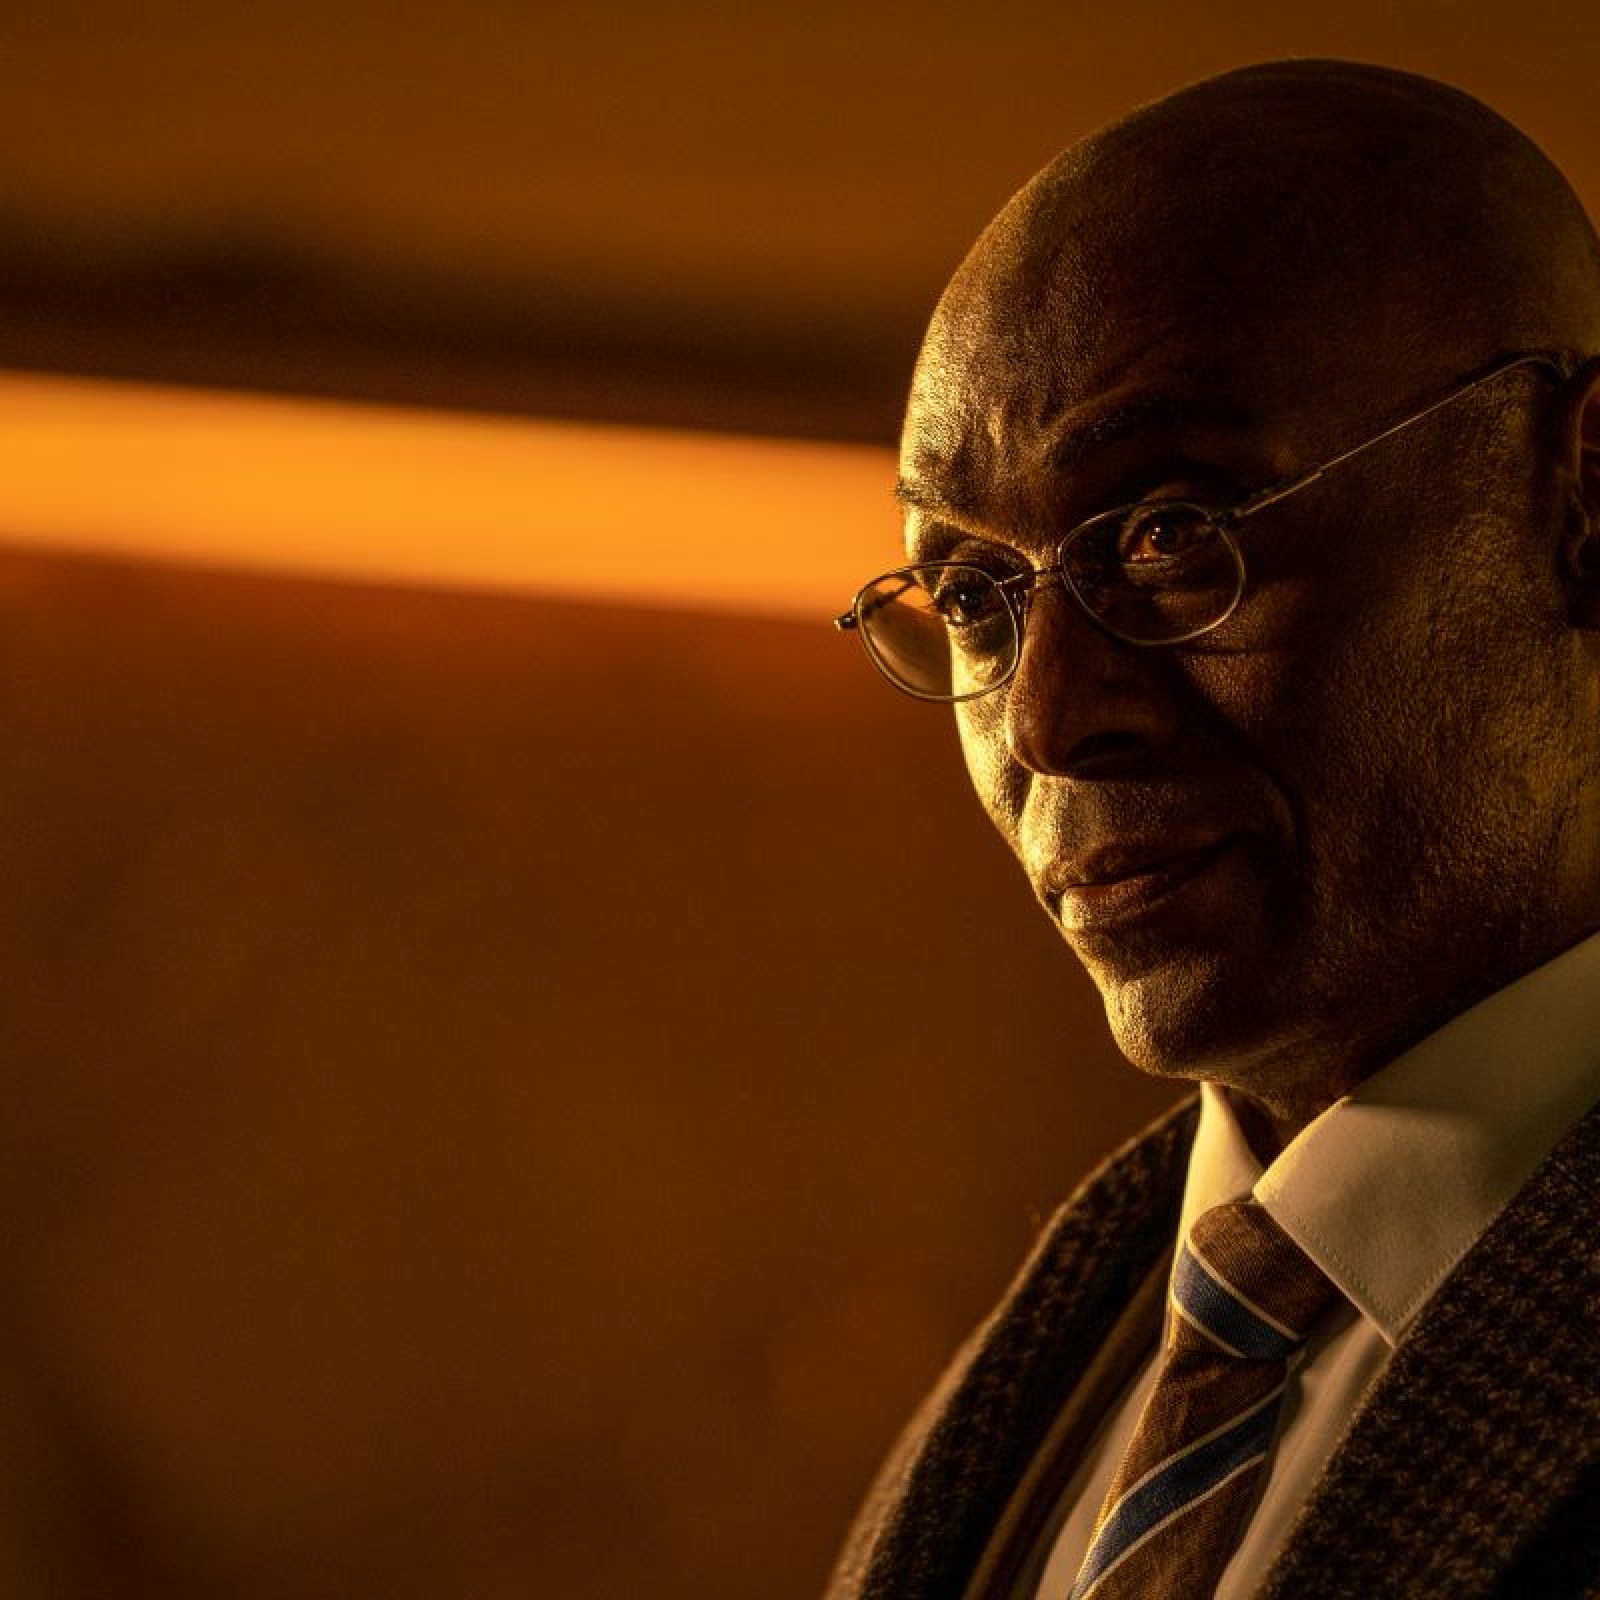 Cast of 'John Wick: Chapter 4' pay respects to late actor Lance Reddick